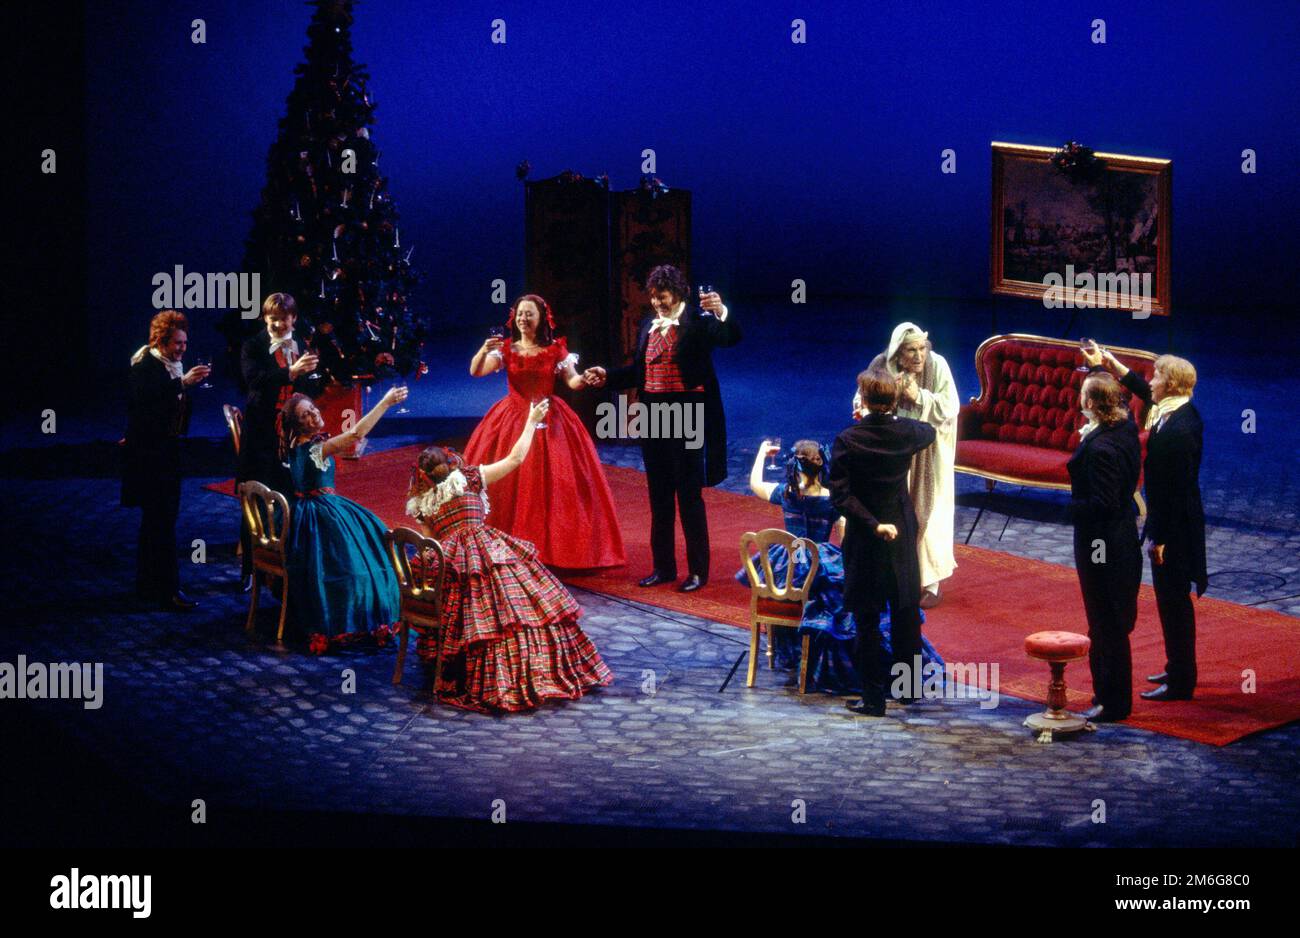 centre, l-r: Sara Weymouth (Fred's wife), Philip Quast (Fred), Clive Francis (Ebenezer Scrooge) in A CHRISTMAS CAROL by Charles Dickens at the Royal Shakespeare Company (RSC), Barbican Theatre, Barbican Centre, London EC2  28/11/1994   adapted by John Mortimer  music: Nigel Hess  set design: John Gunter  costumes: Deirdre Clancy  lighting: Nigel Levings  choreography: Lindsay Dolan  director: Ian Judge Stock Photo